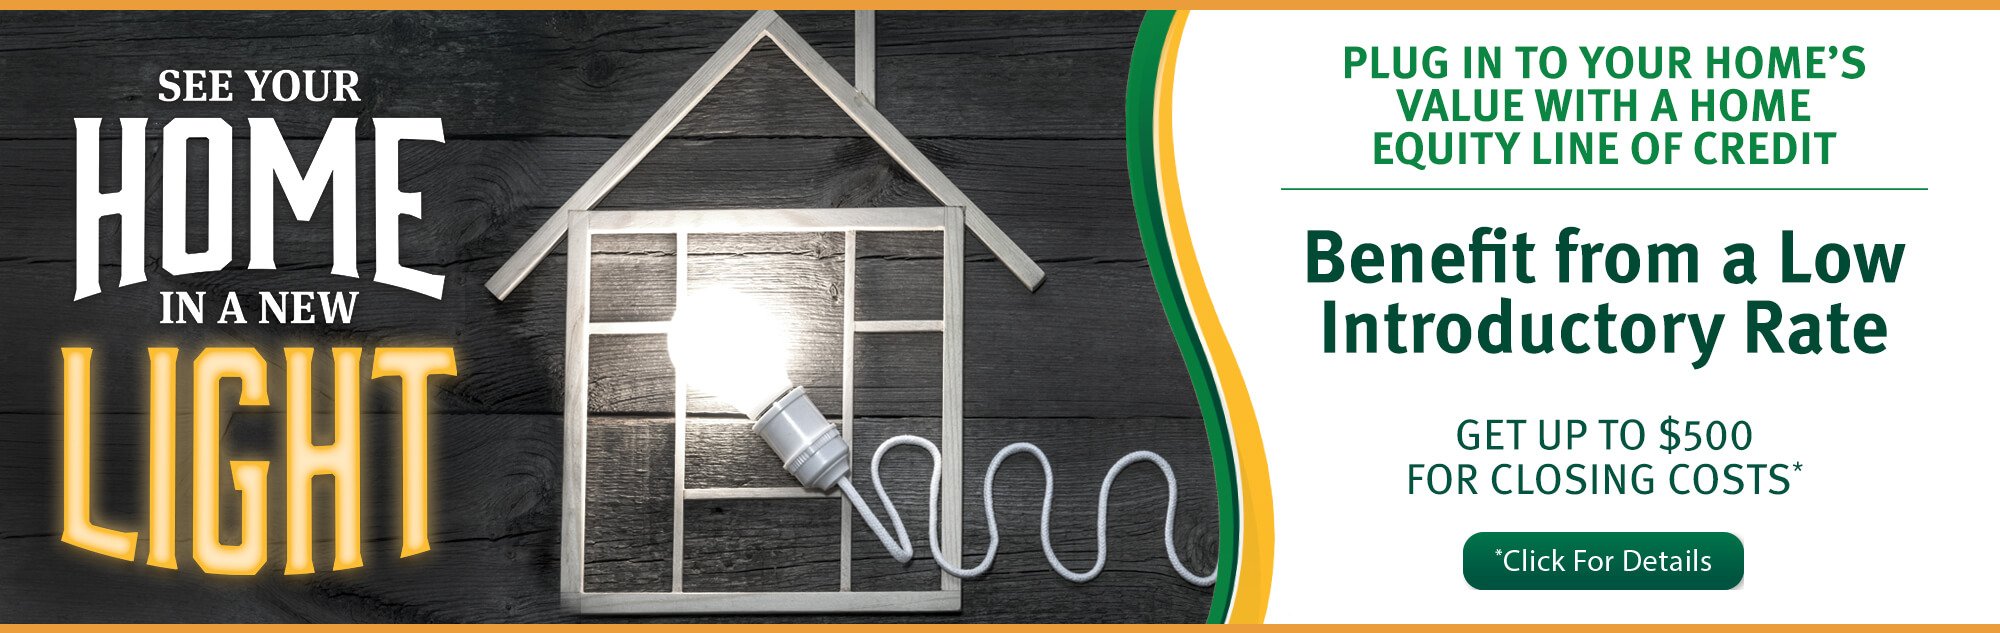 See Your Home in a new light - Plug in to your home's value with a home equity line of credit